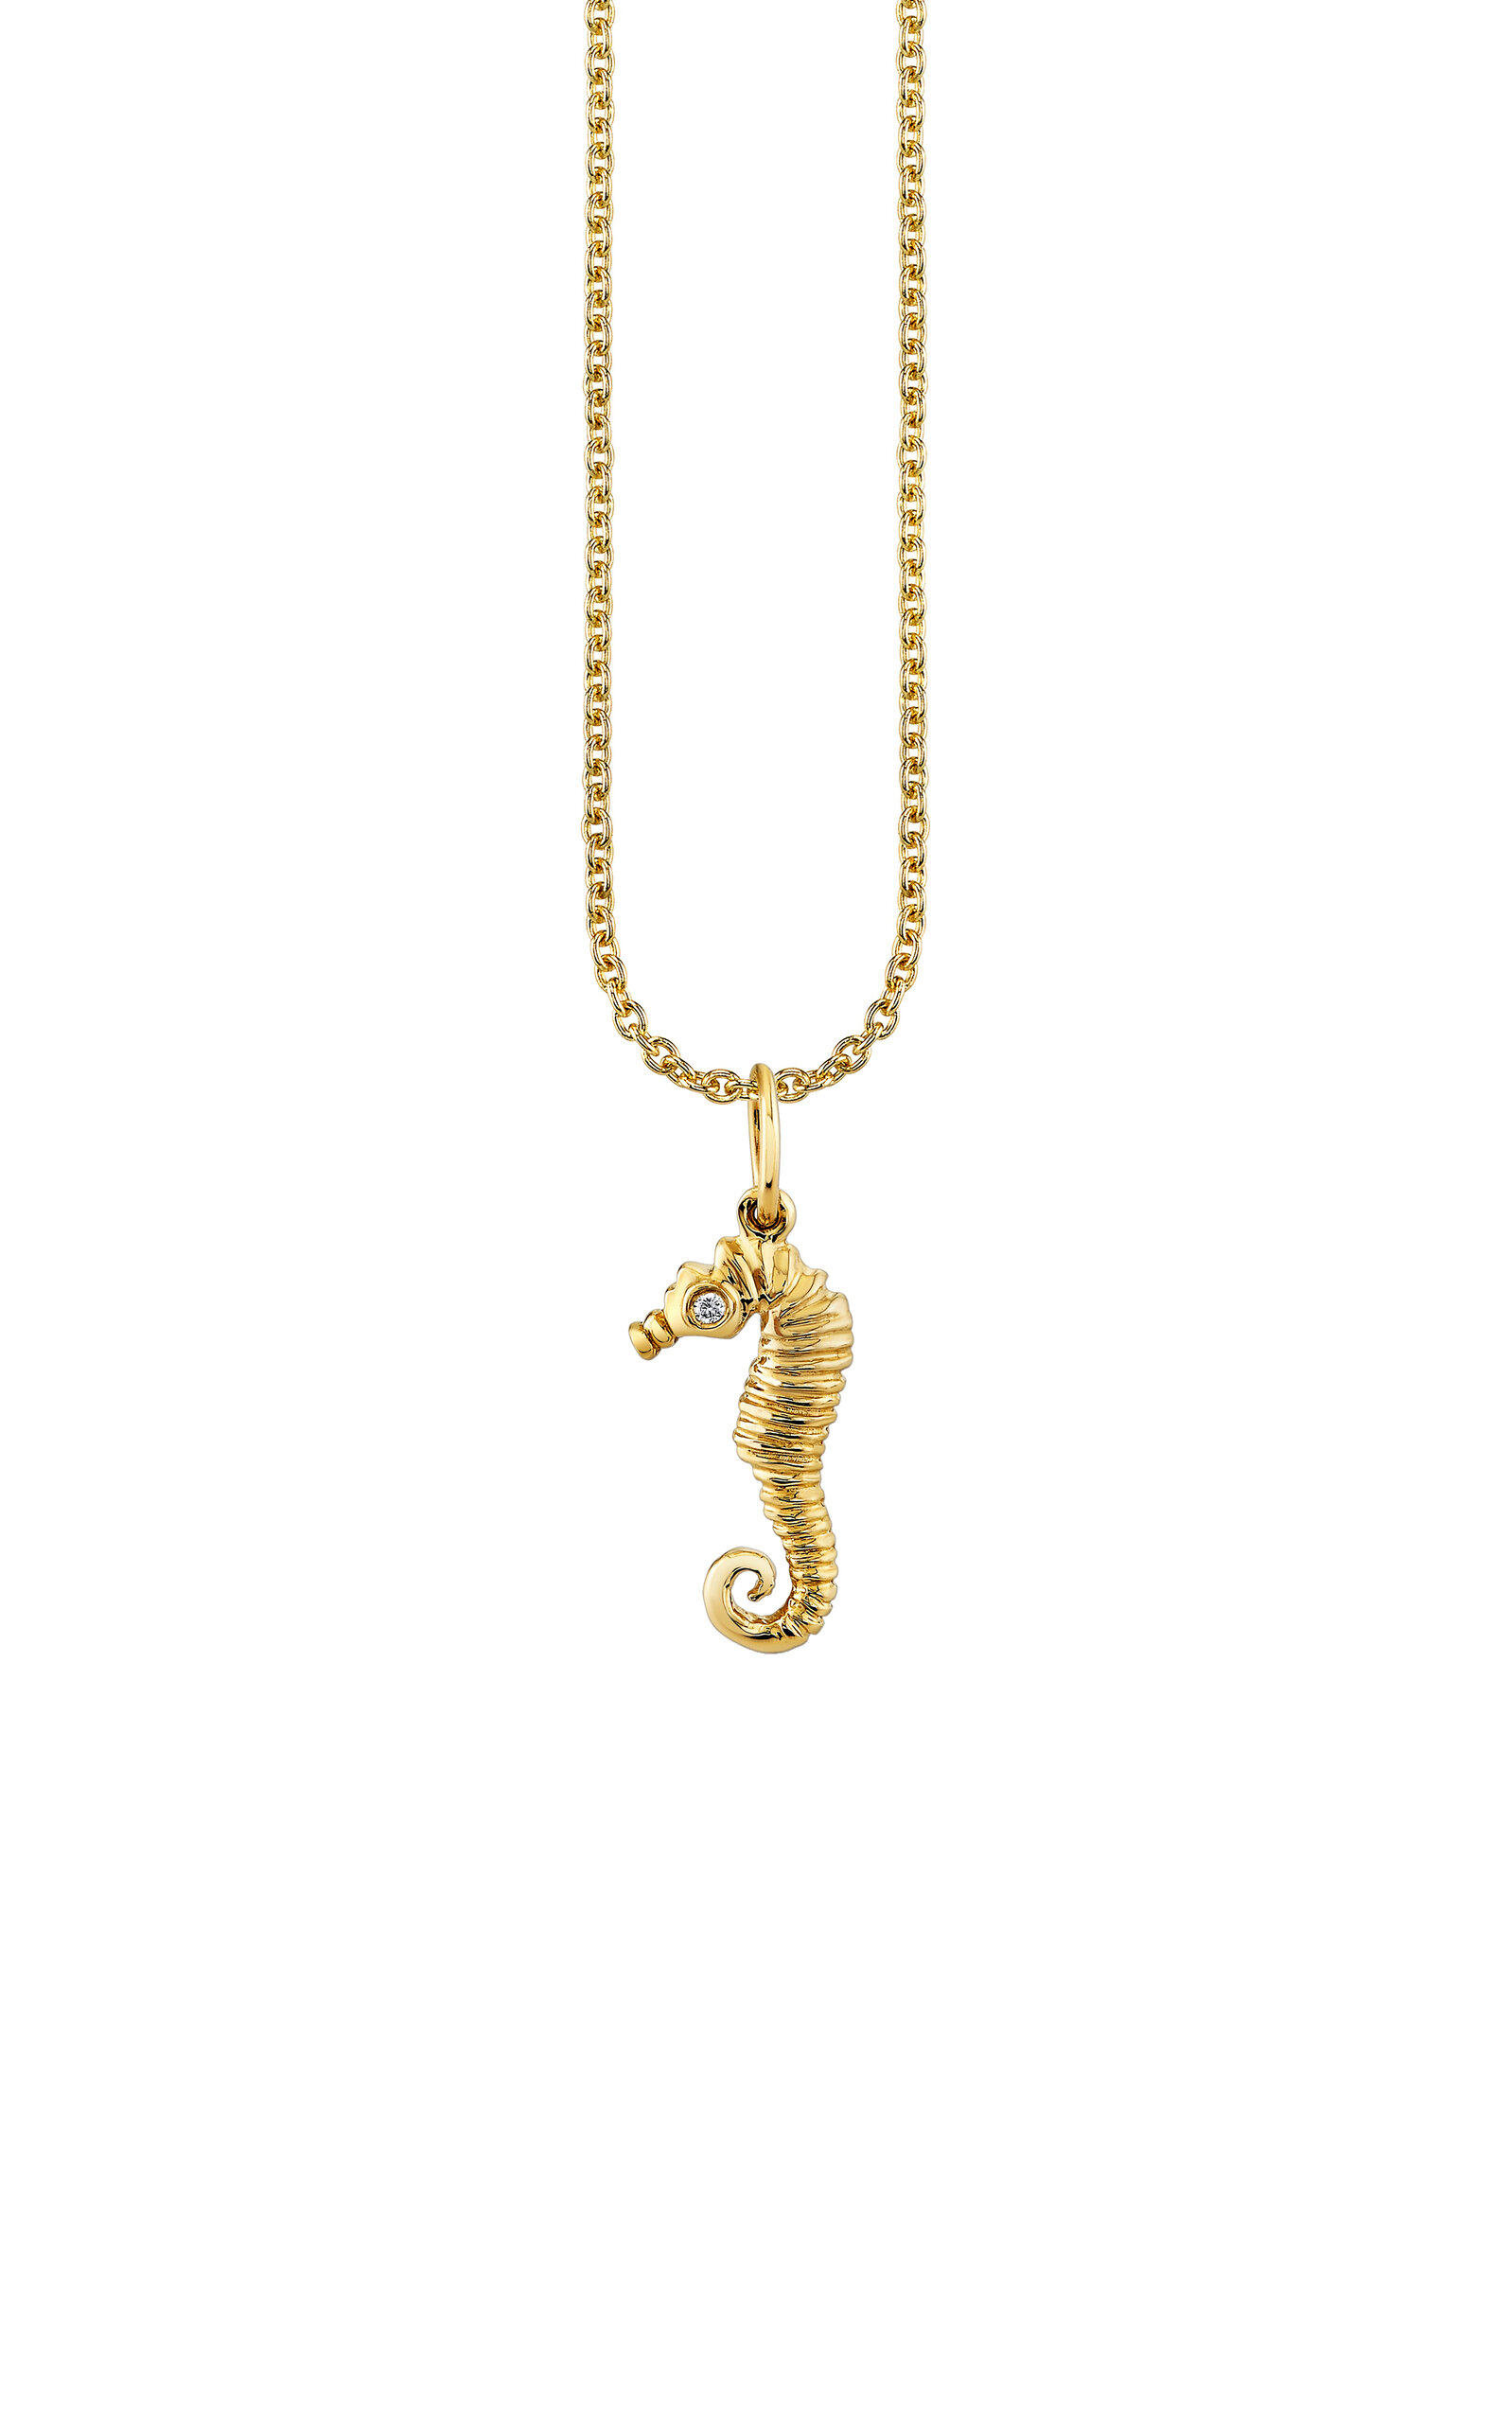 Sydney Evan 14k Yellow Gold Small Seahorse Charm Necklace